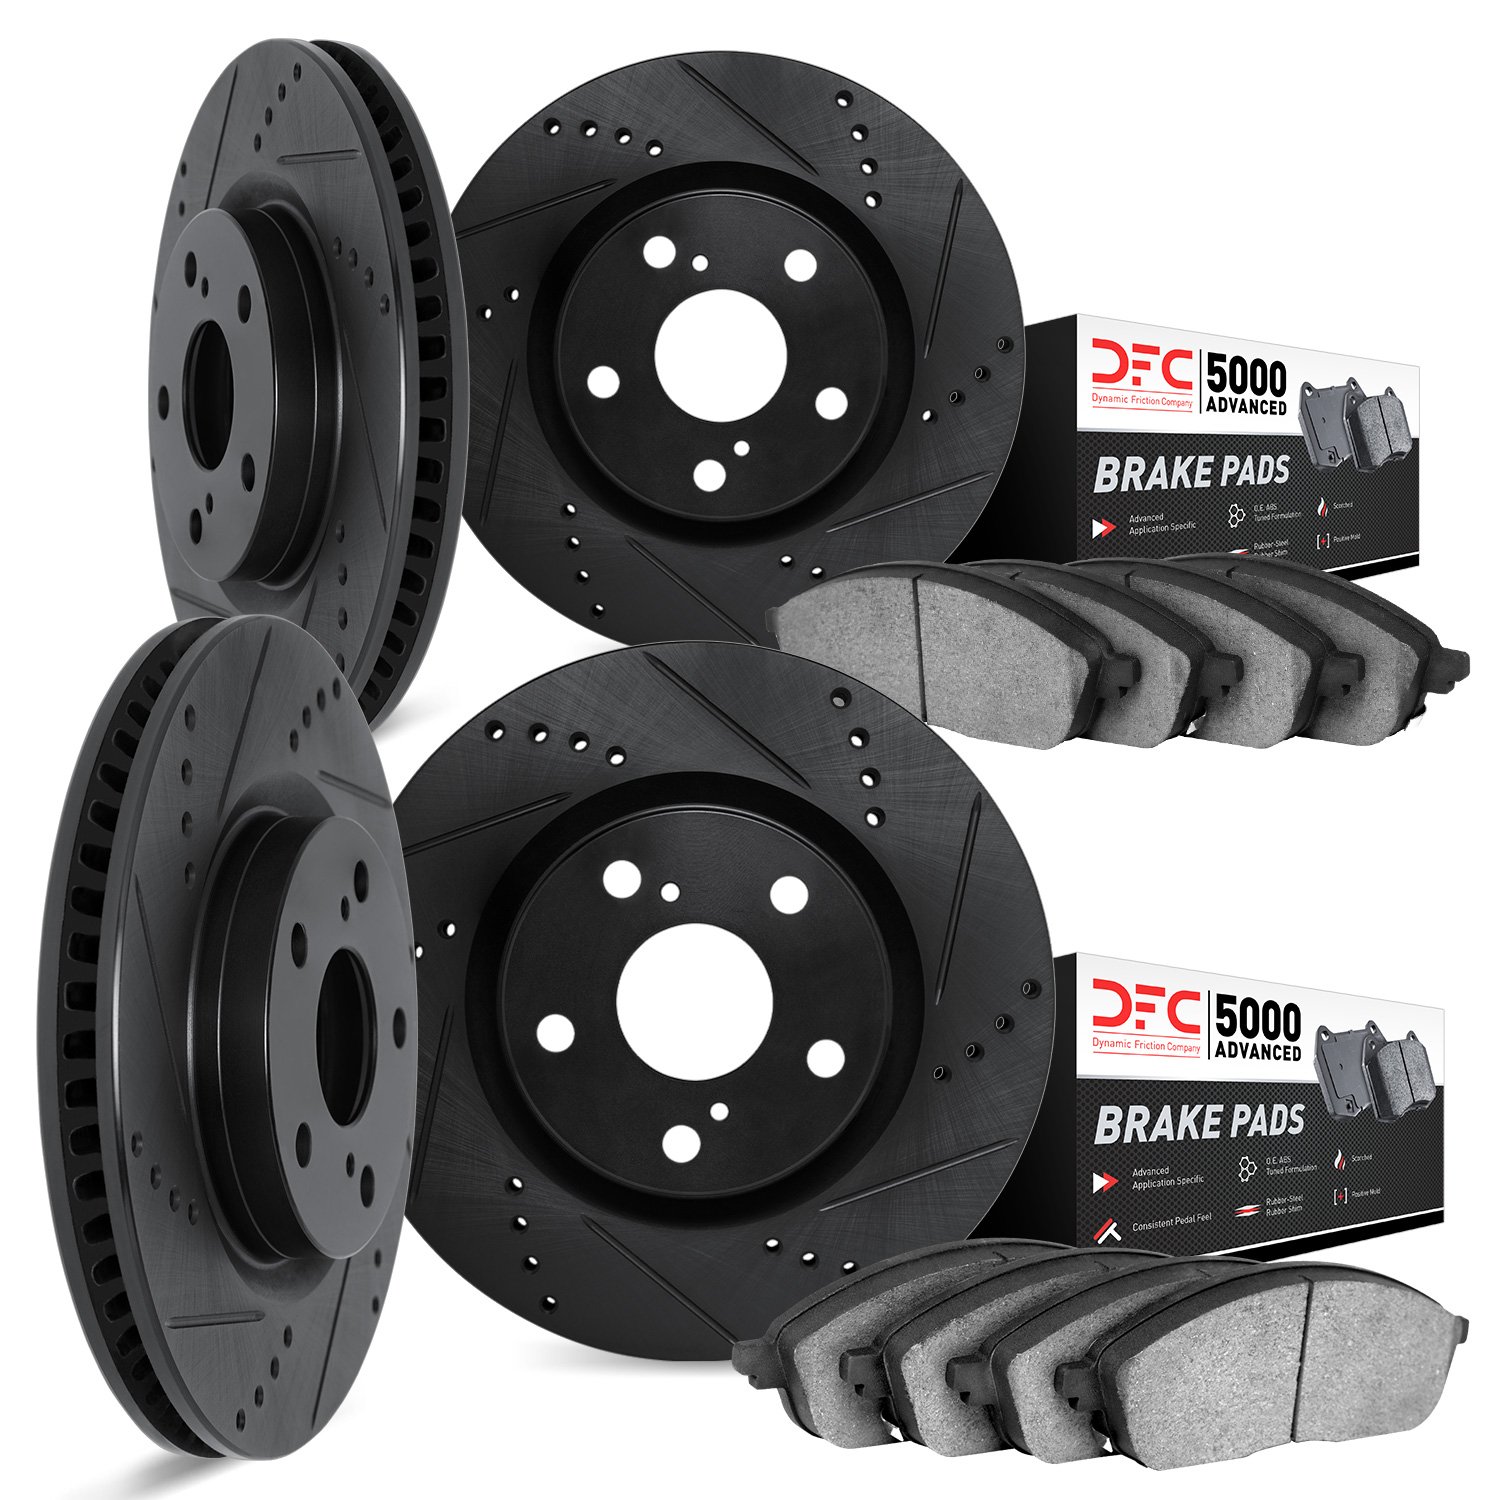 8504-31084 Drilled/Slotted Brake Rotors w/5000 Advanced Brake Pads Kit [Black], Fits Select BMW, Position: Front and Rear